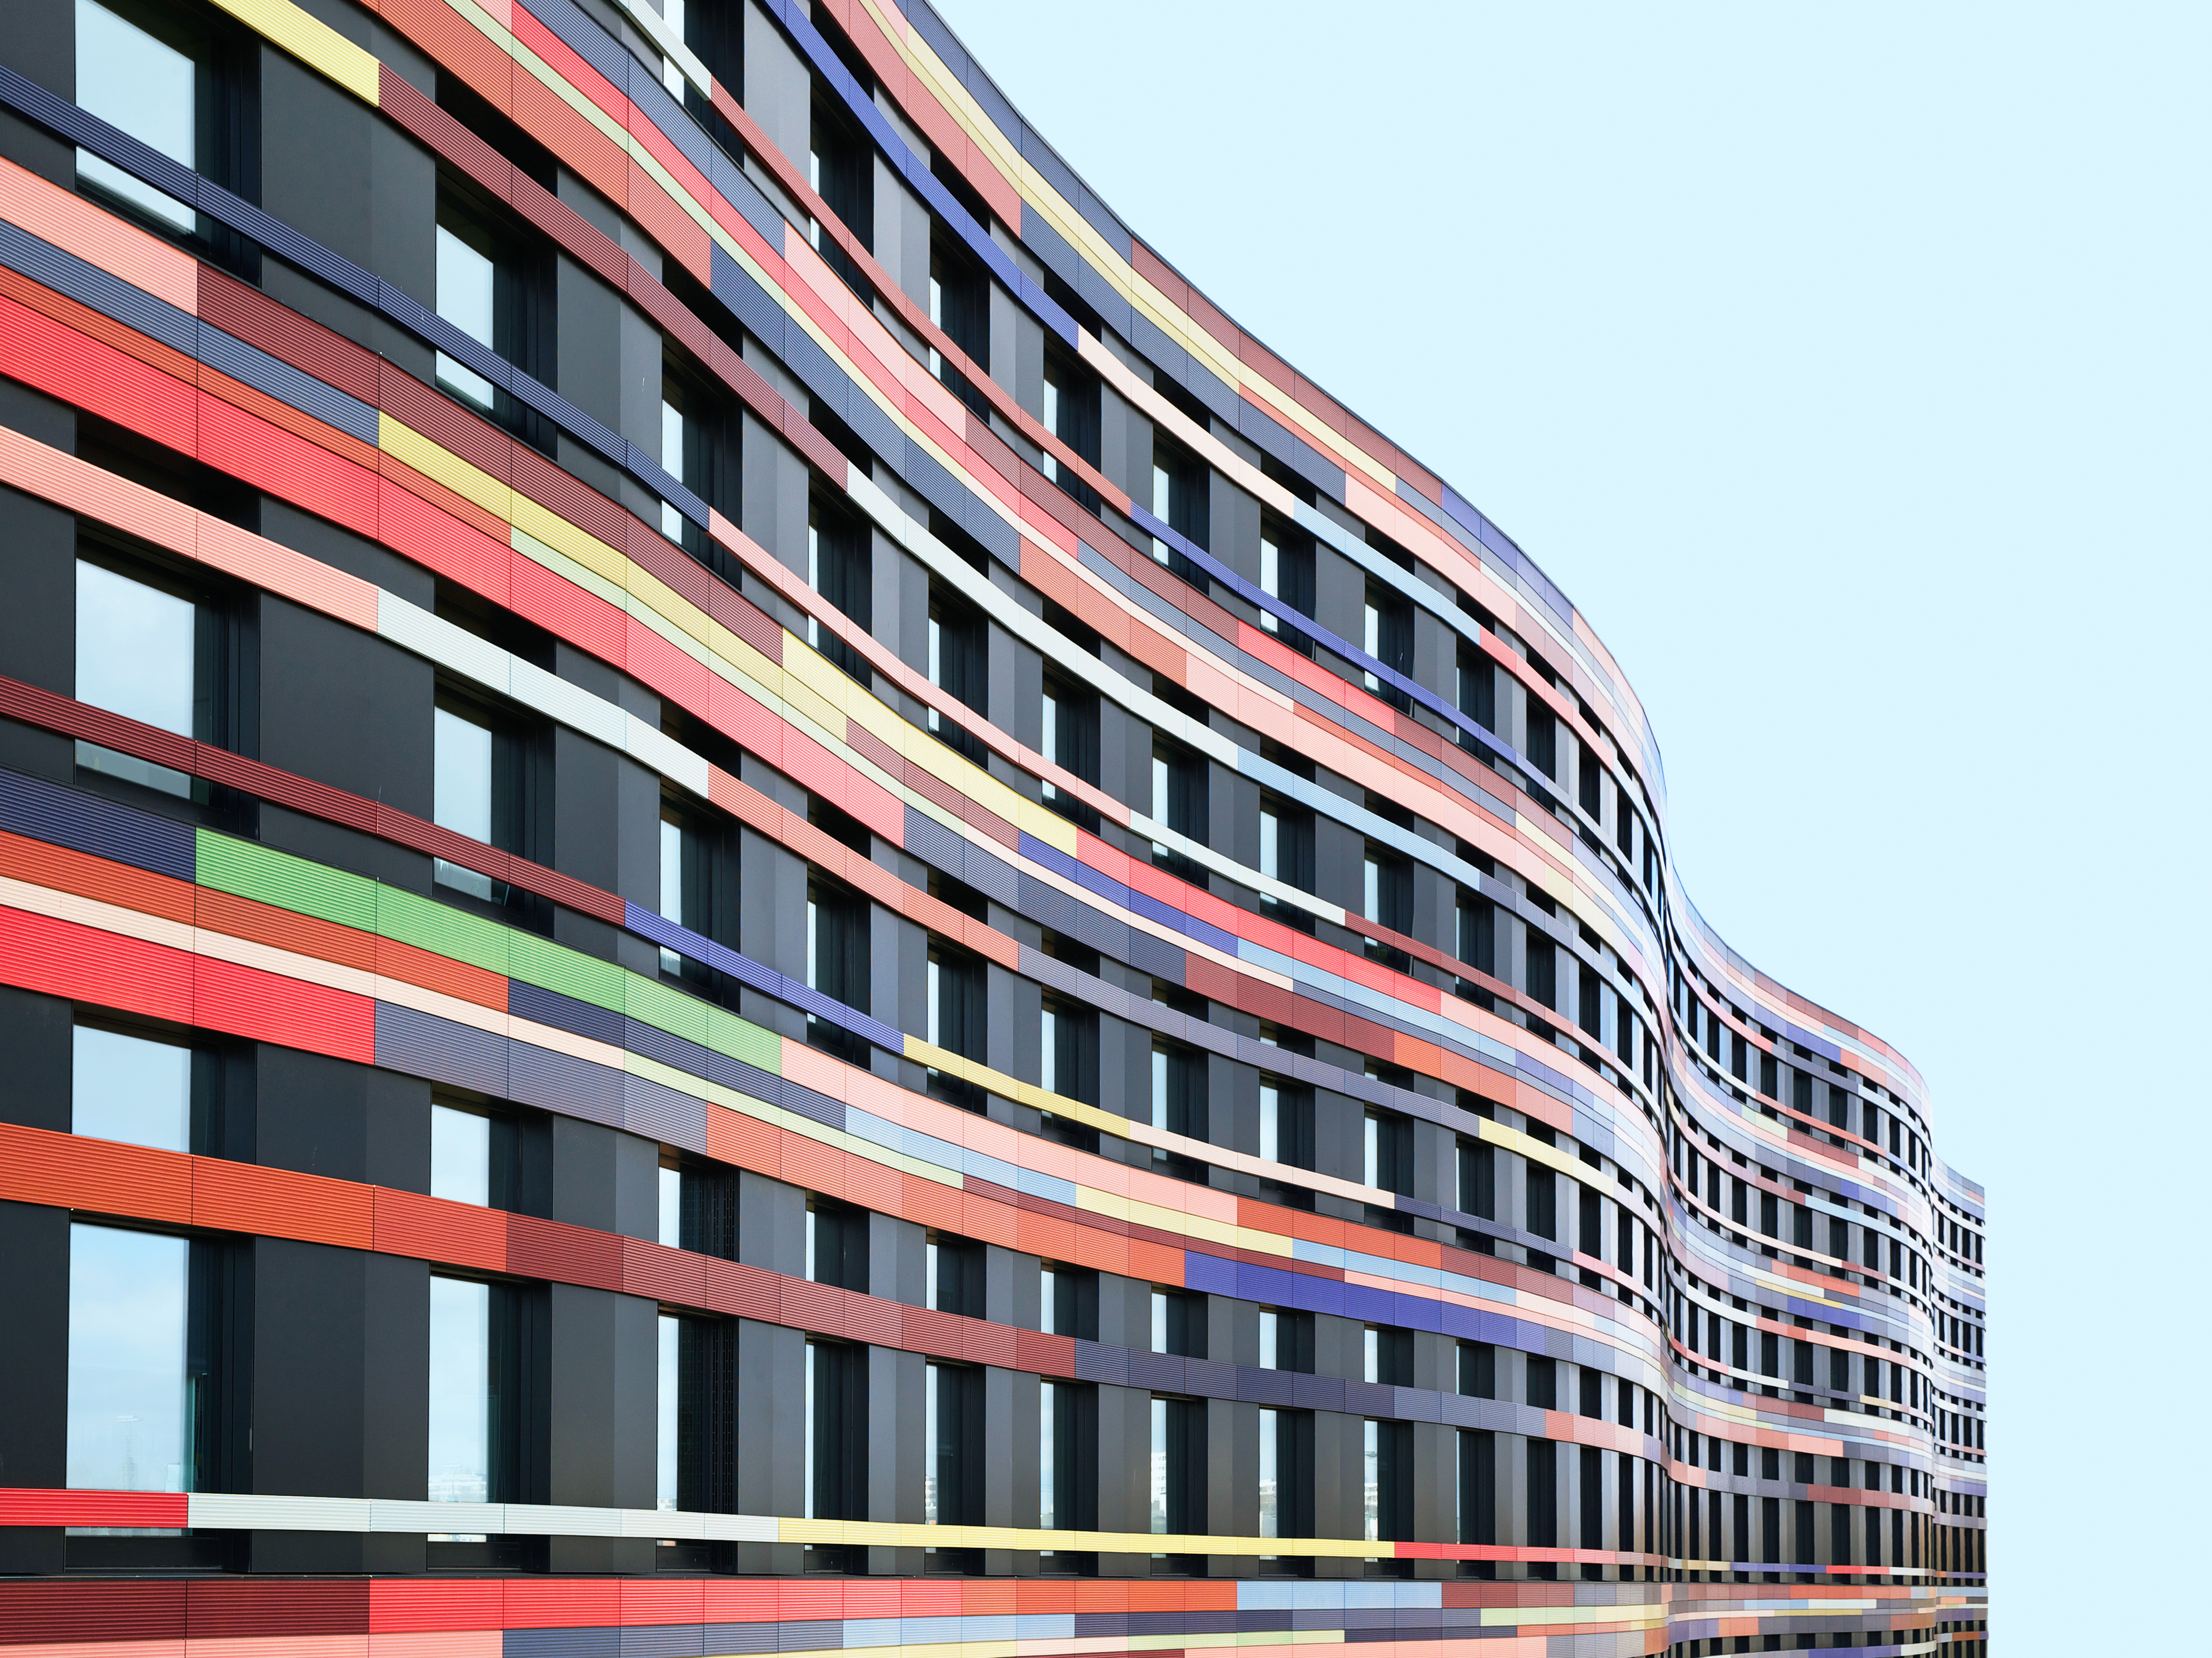 Architecture Window Colorful Building Office Wavy 5464x4096